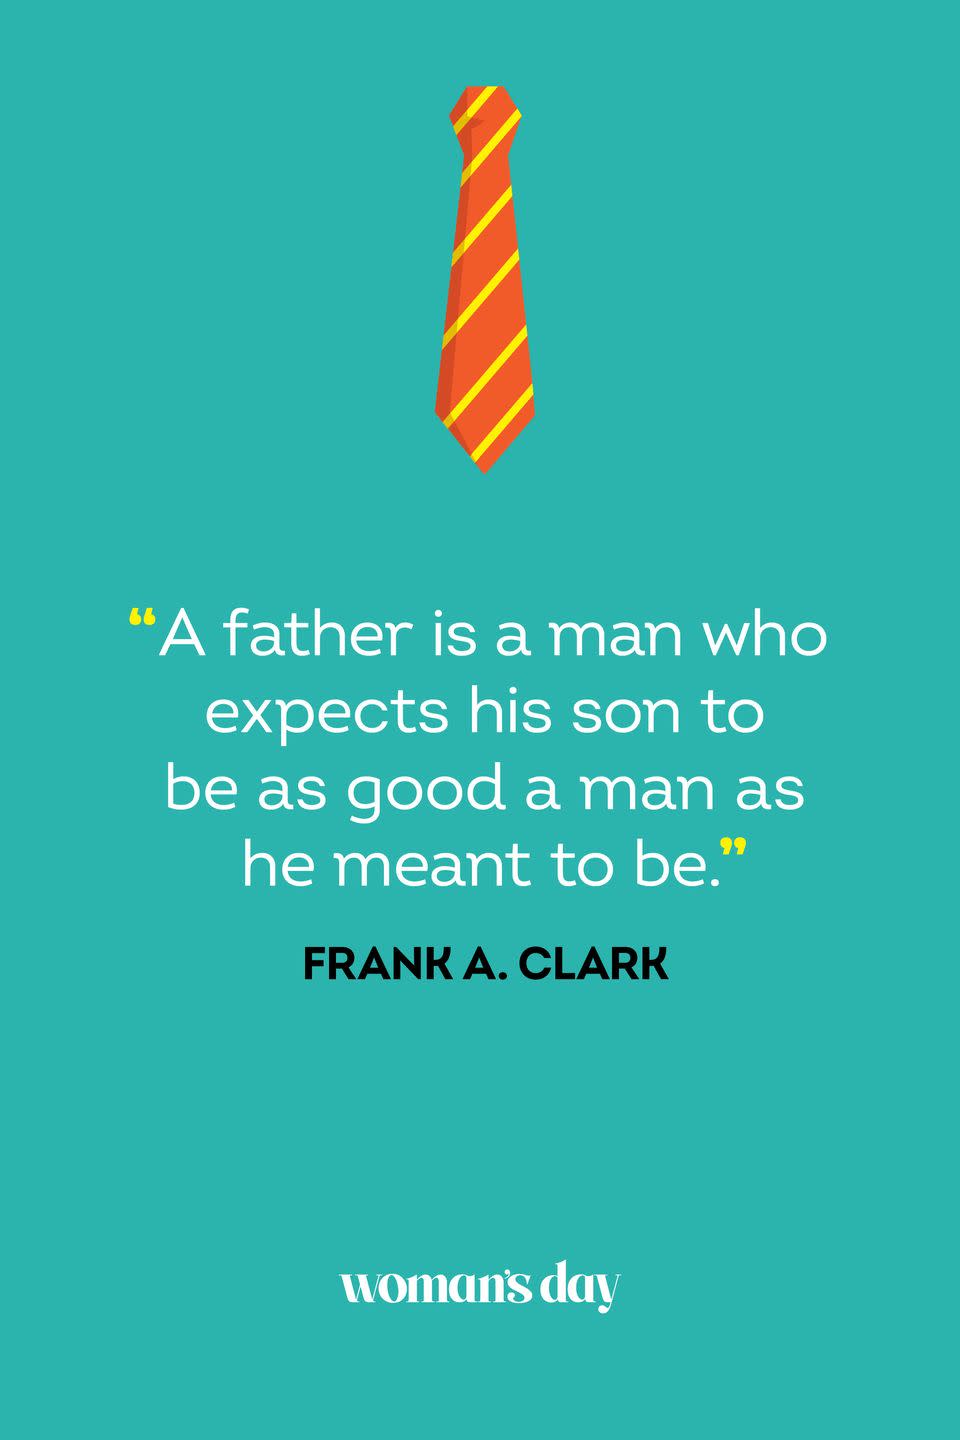 fathers day quotes frank a clark